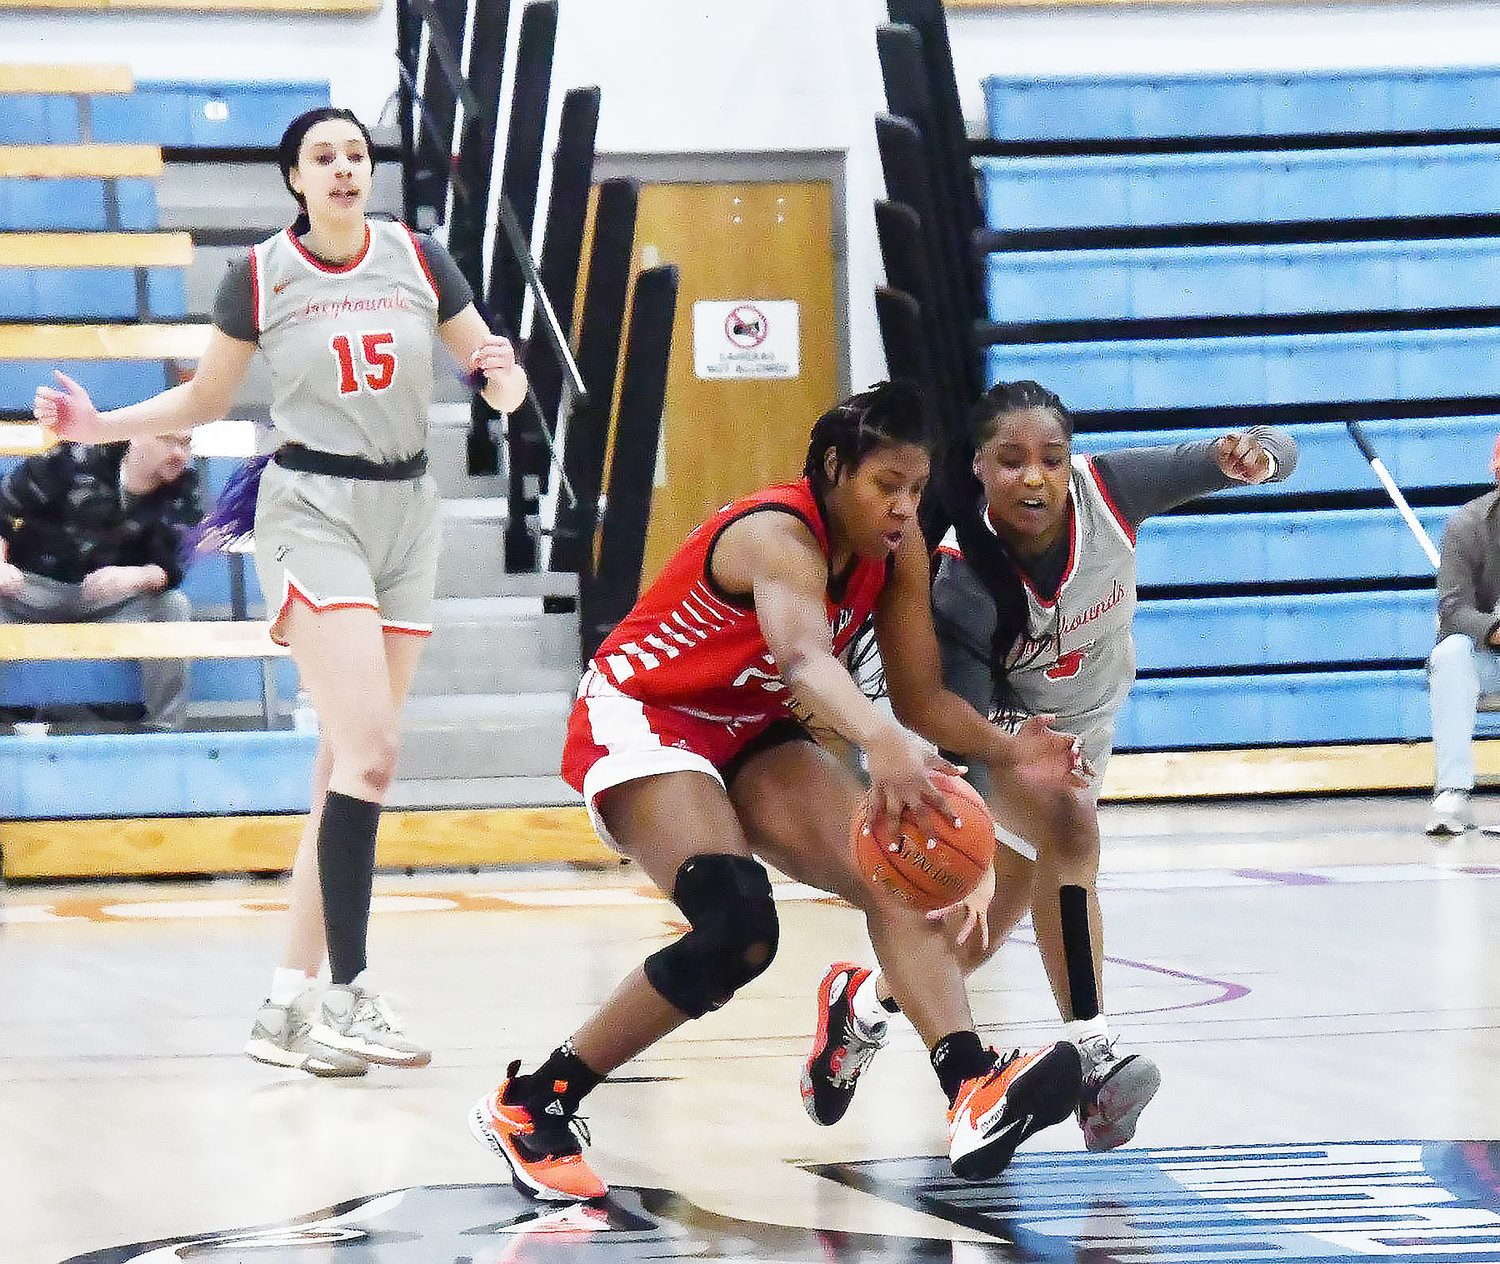 Moberly Bukky Akinsola (right) attempts to steal the ball during the first quarter of the Region XVI women's basketball championship game Friday, March 10, at Fitzsimmons-John Arena.